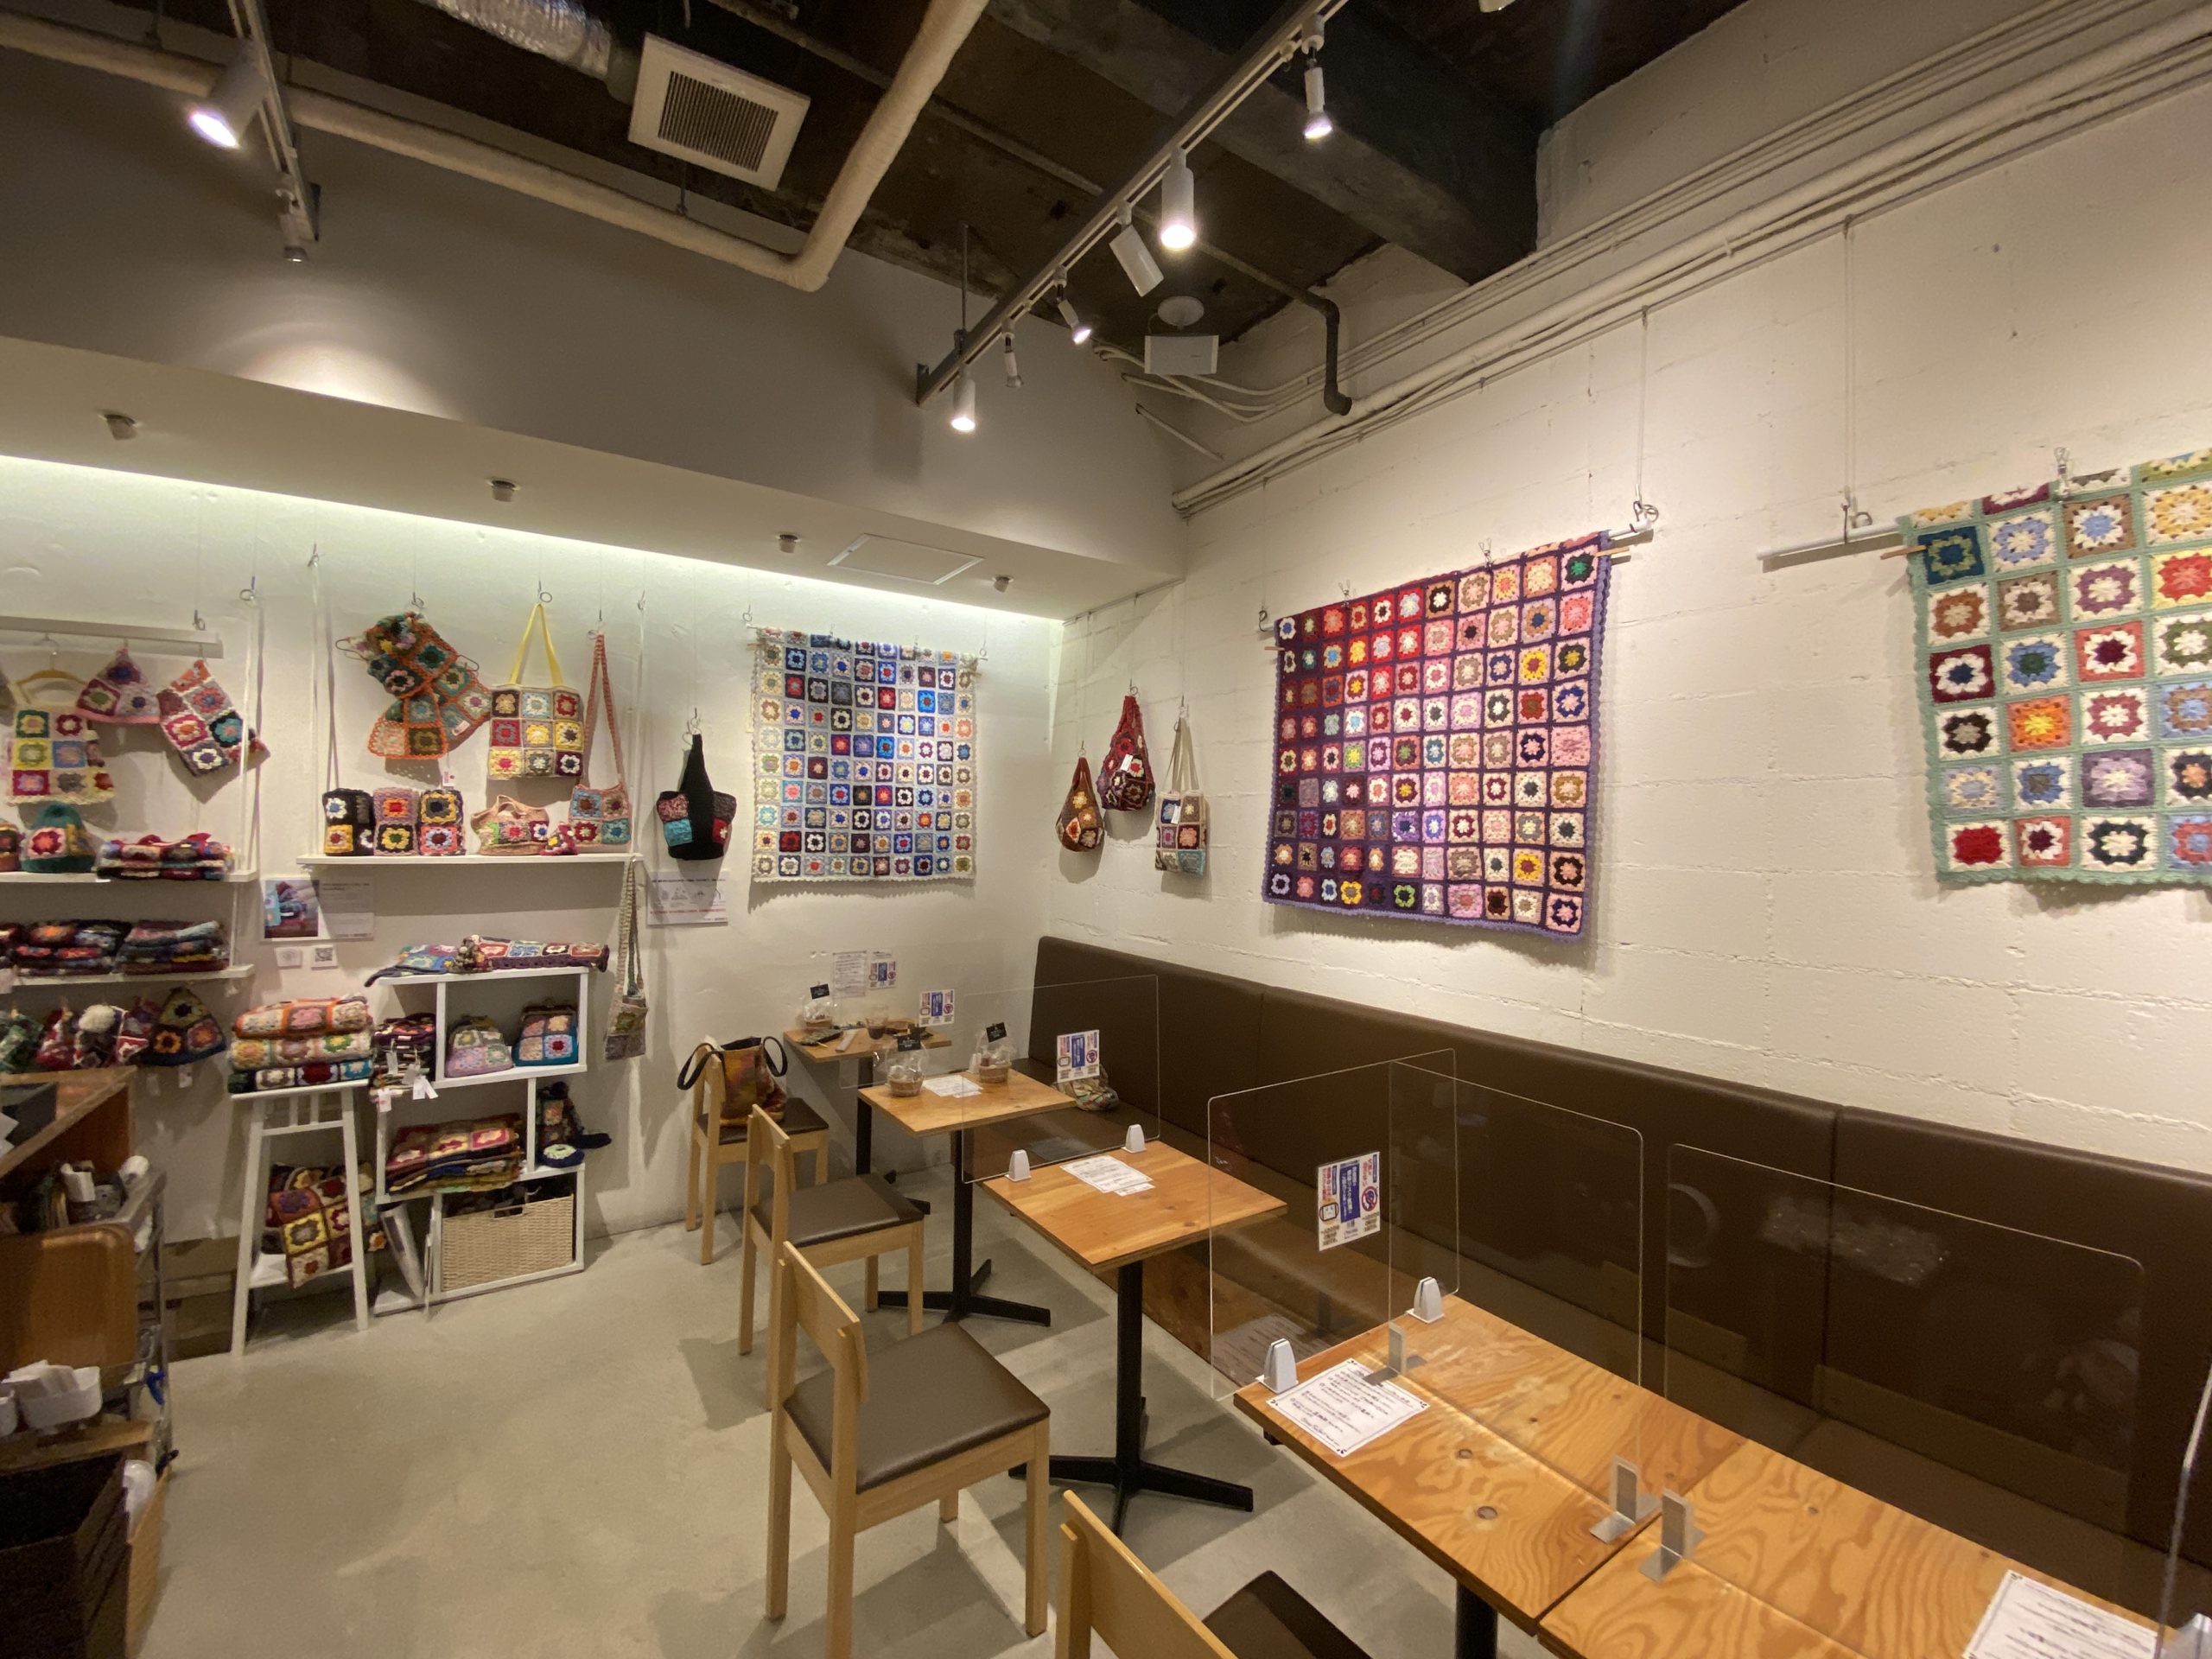 Beans Cafe & Gallery 片岡